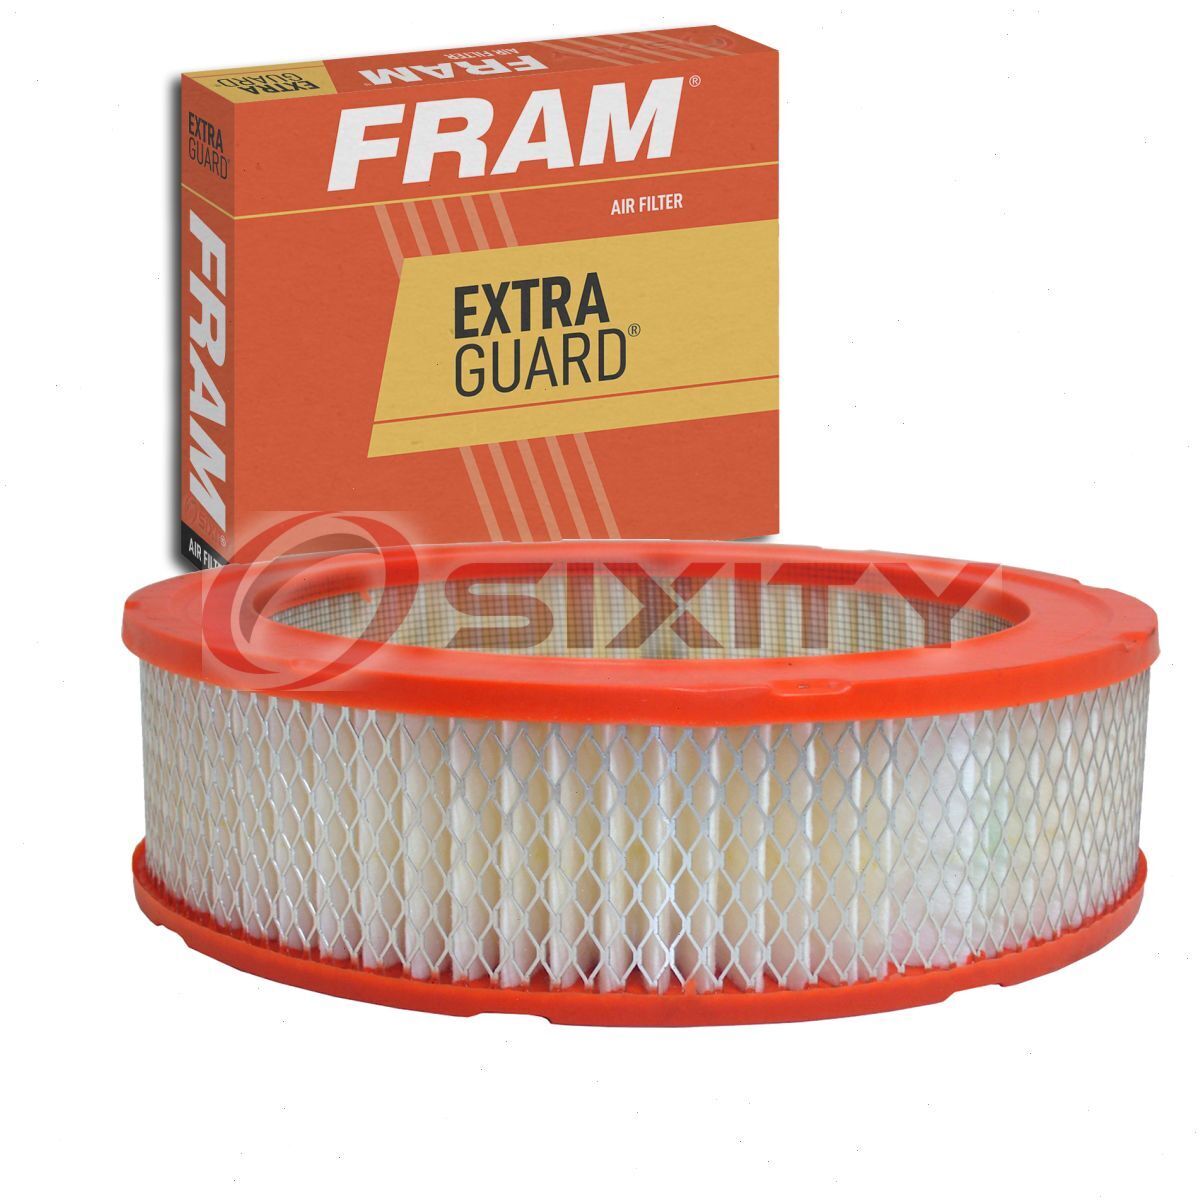 FRAM Extra Guard Air Filter for 1964-1974 Plymouth Barracuda Intake Inlet fo